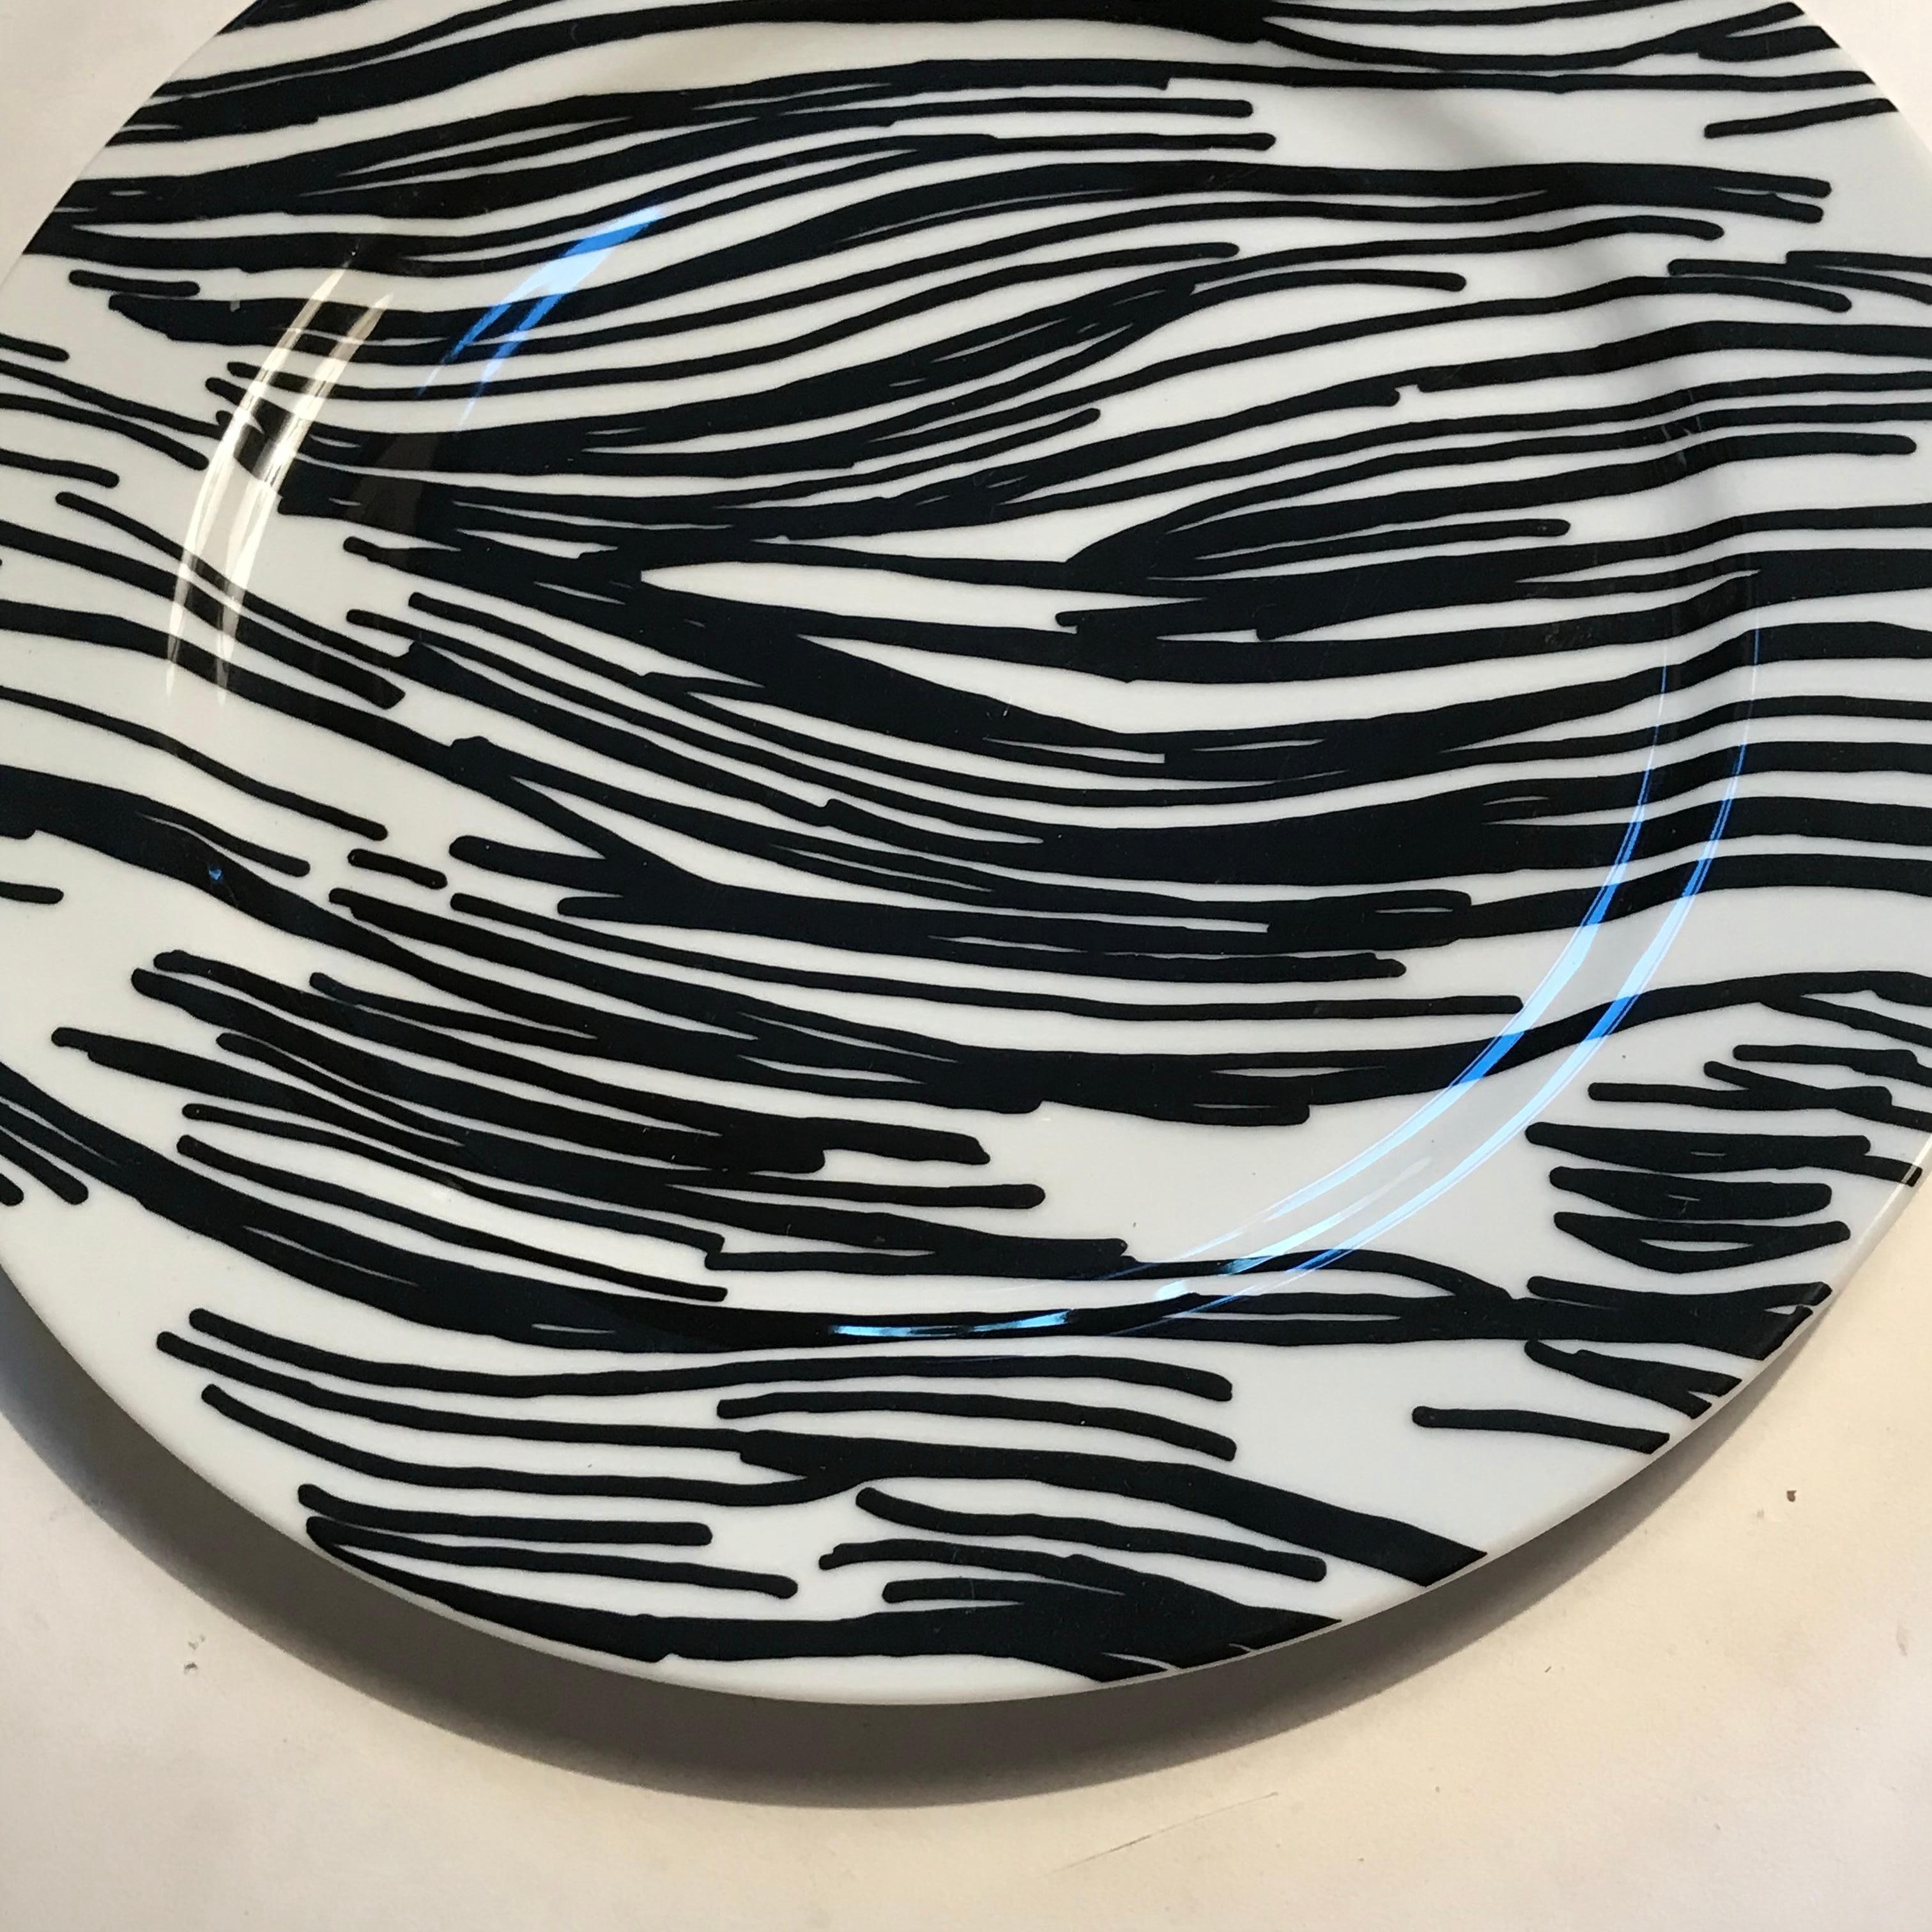 Ceramic plate designed by artist Mark Bradford. Produced on the occasion of the Santa Monica Museum of Art’s 20th anniversary. Edition of 125 Plate signed; numbered and stamped with artist signature and SMMOA 20th anniversary stamp to the verso.